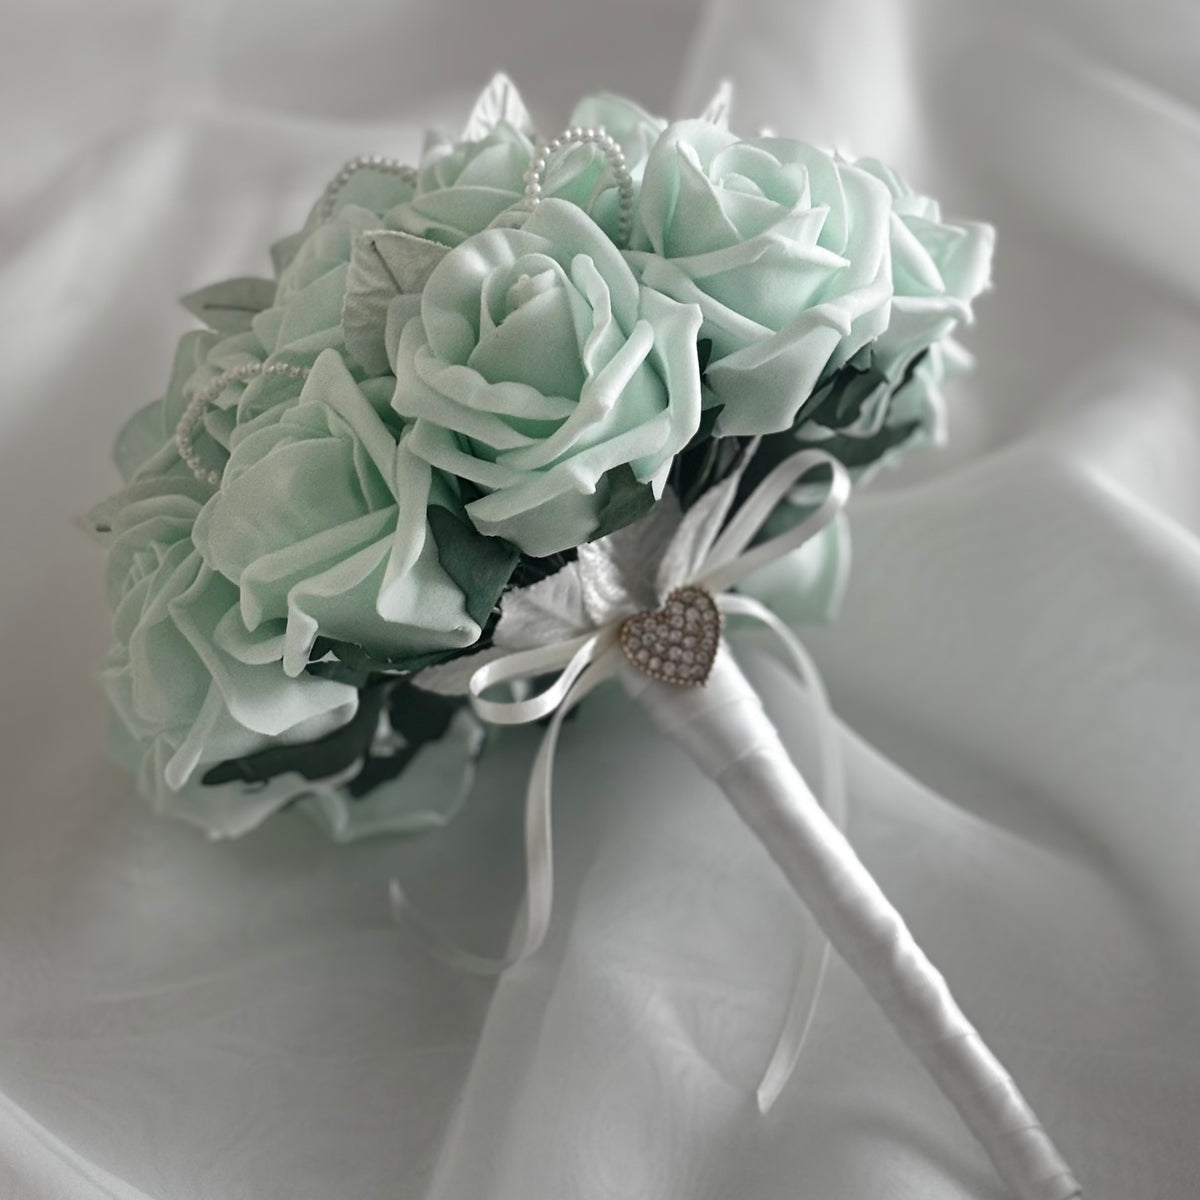  Mefier Home Artificial Flowers Combo Delicate Mint Green Mixed  Flowers with Stem for DIY Wedding Bouquets Centerpieces Baby Shower Party  Home Decorations : Home & Kitchen